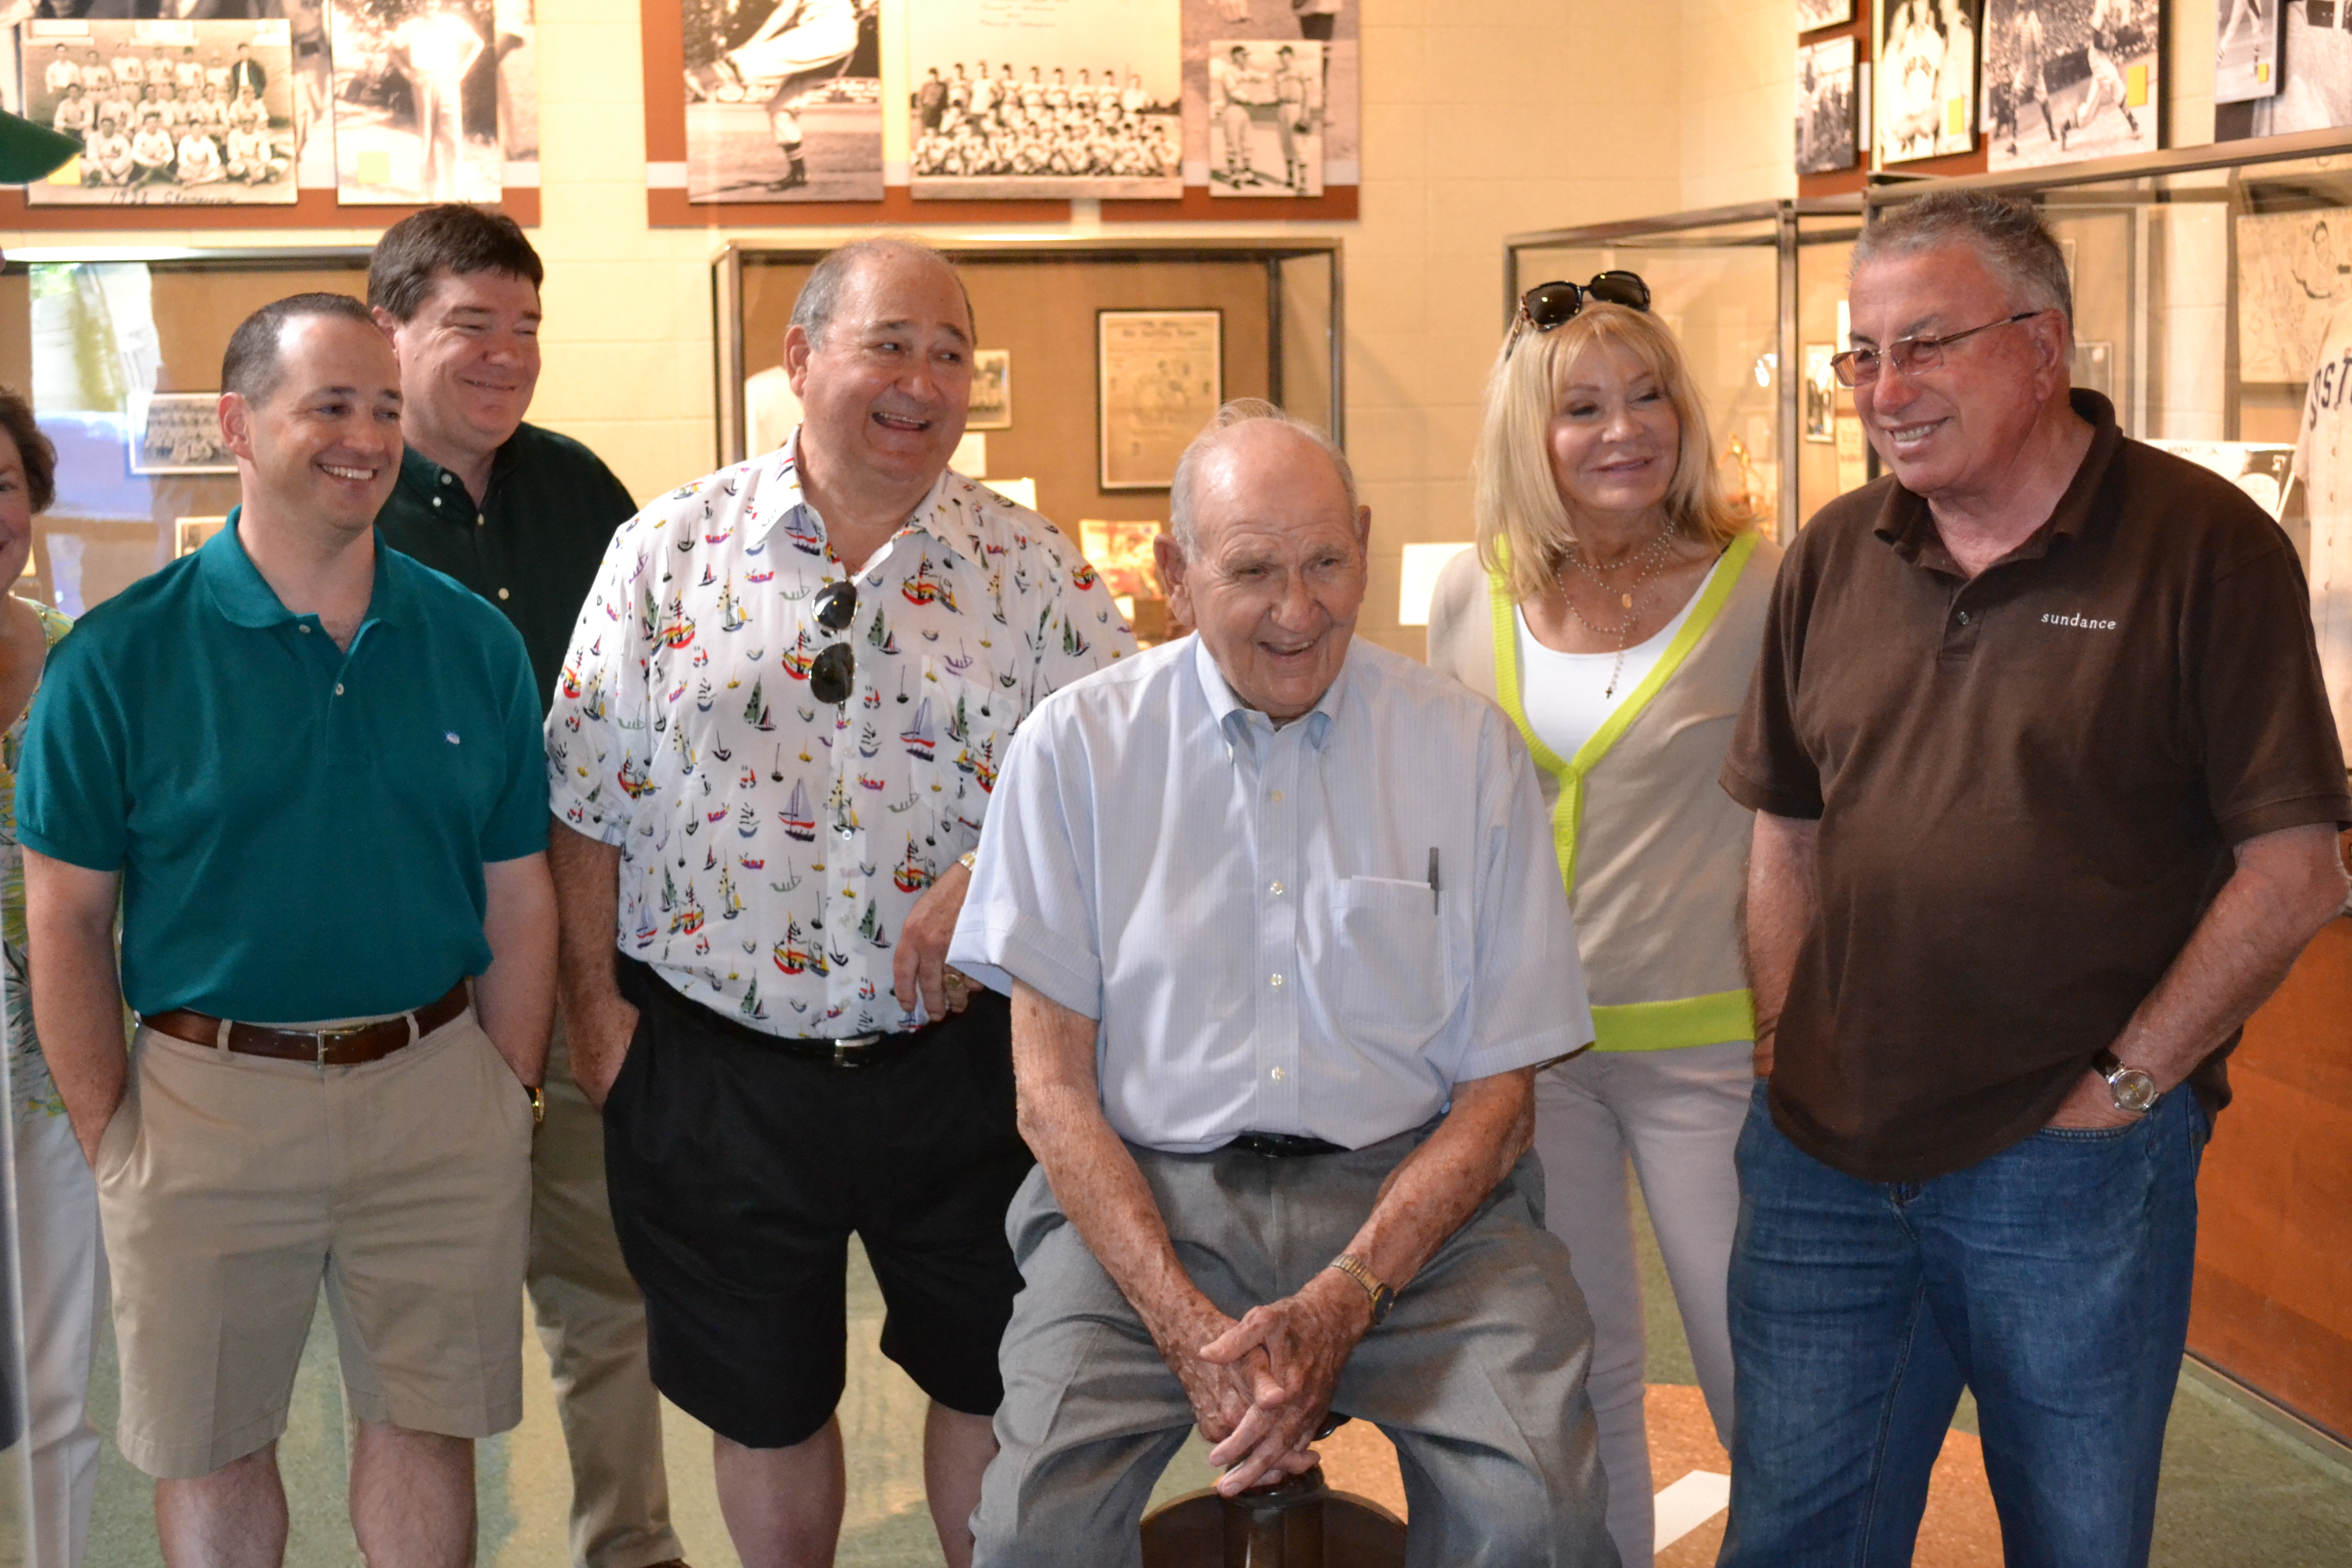 PHOTO:  L to R: Jeffrey Thompson, Gary Bouse, Jack Davis, Coach Dave “Boo” Ferriss, and Darlene and Ron Salisbury tour the Dave “Boo” Ferriss Museum on Delta State University’s campus. 